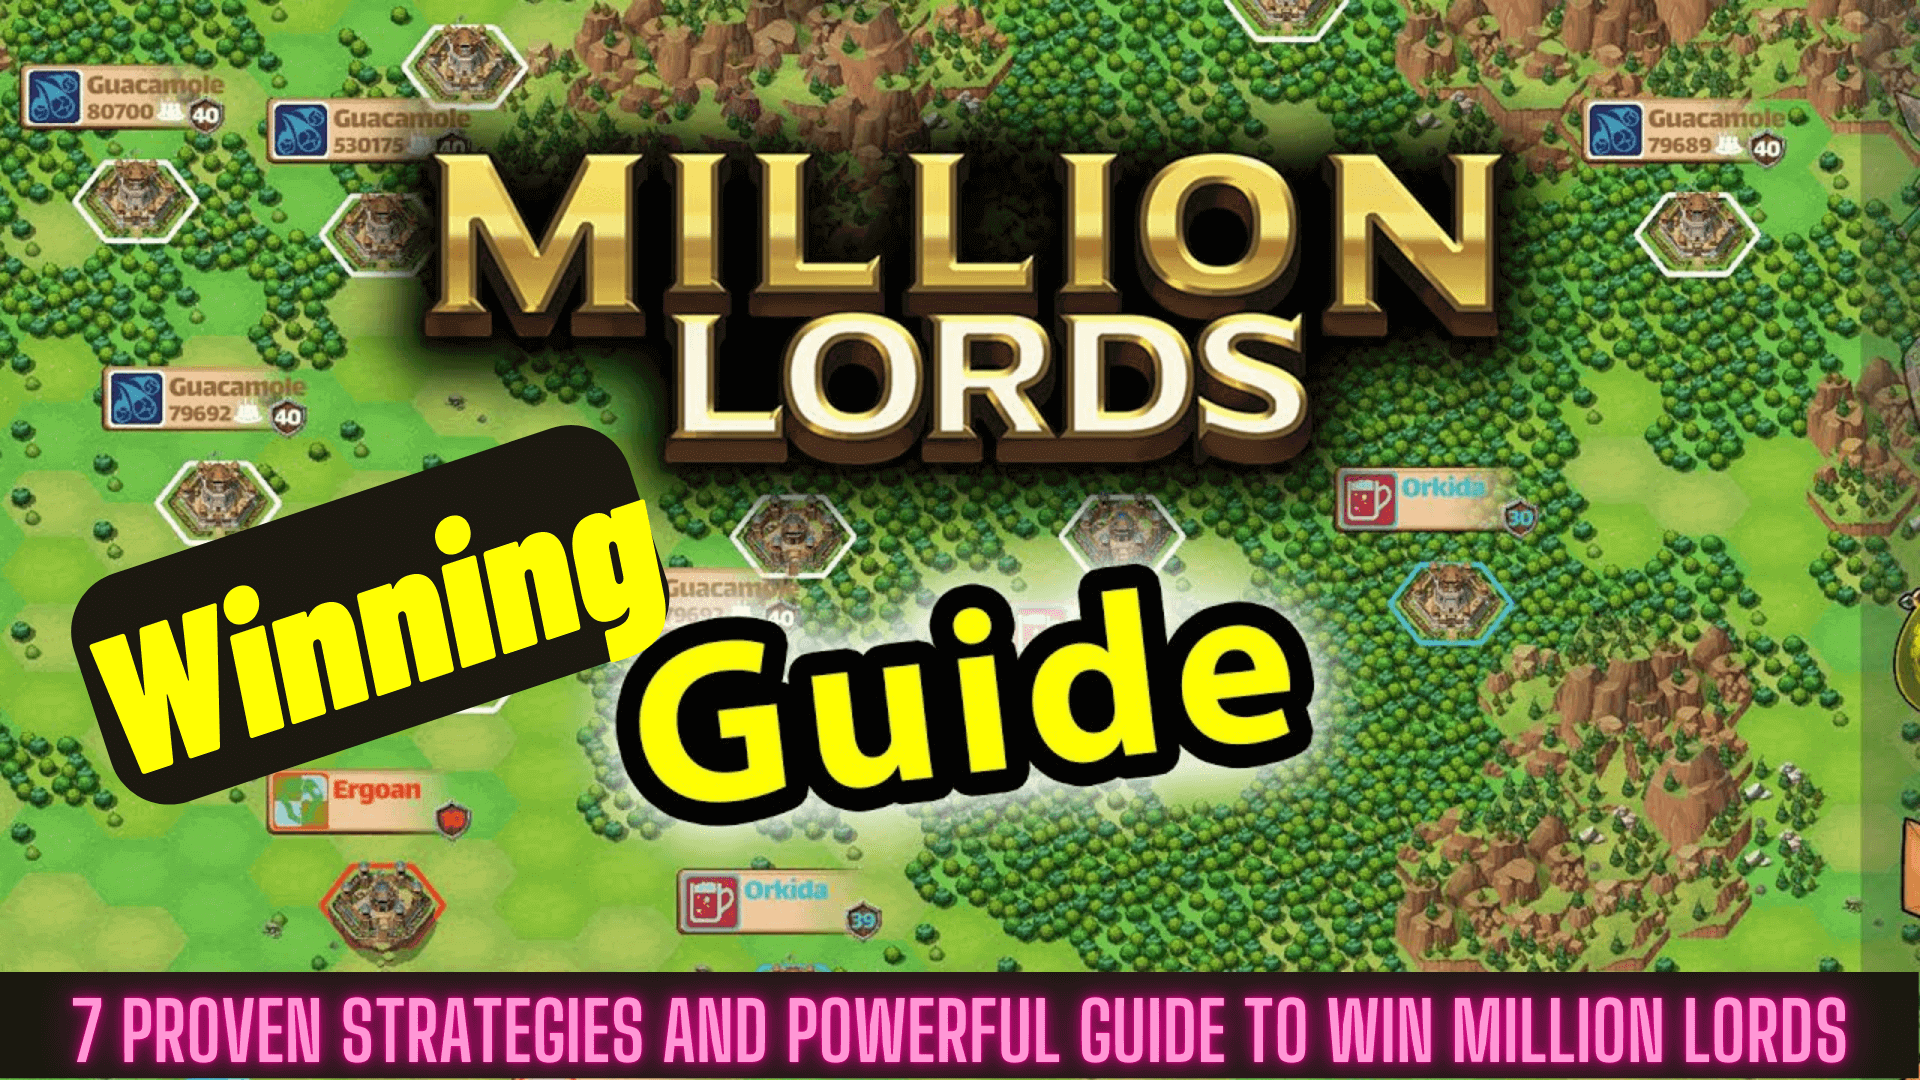 7 Proven Strategies and Powerful Guide to win Million Lords